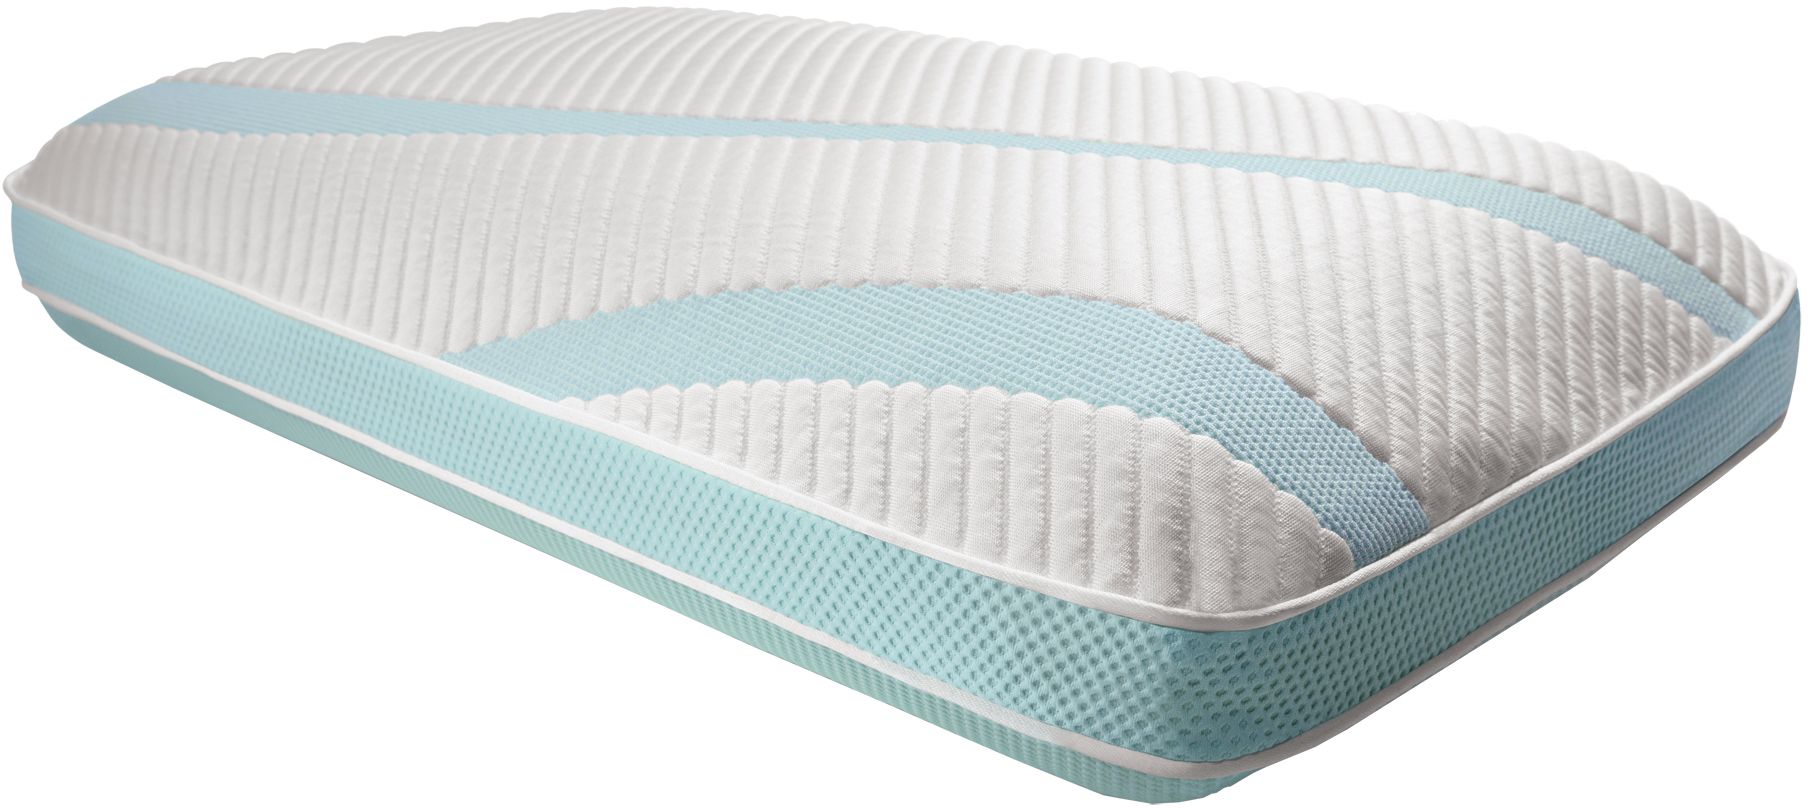 3 Best Side Sleeper Pillows For More Comfortable Sleep